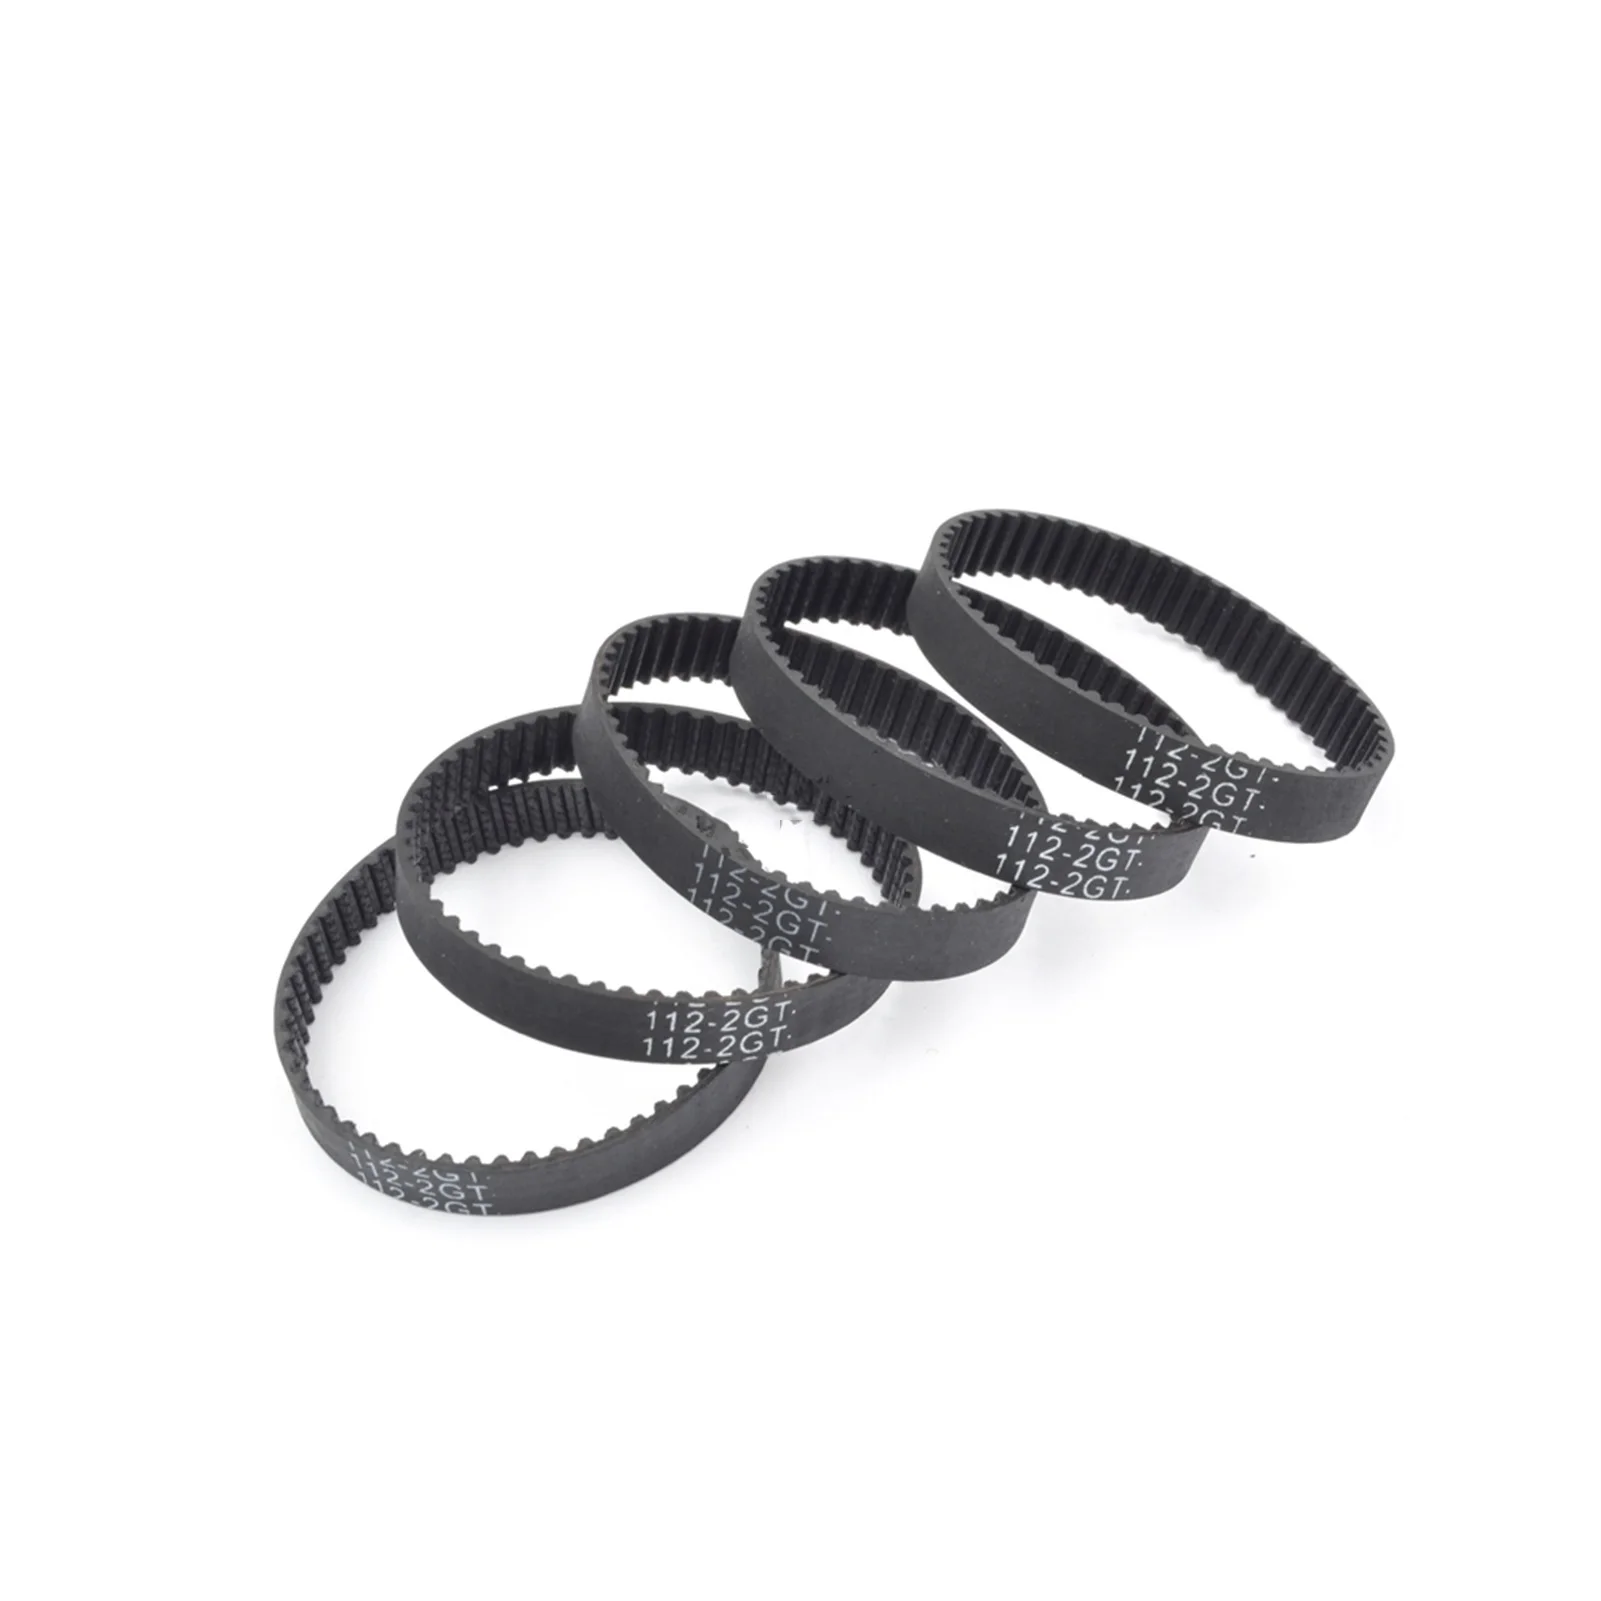 

5PCS GT3 2MGT 2M 2GT Closed-loop Synchronous Timing Belt, Pitch Length 106/108/110/112/114, Width 6/9mm, Teeth 53 54 55 56 57